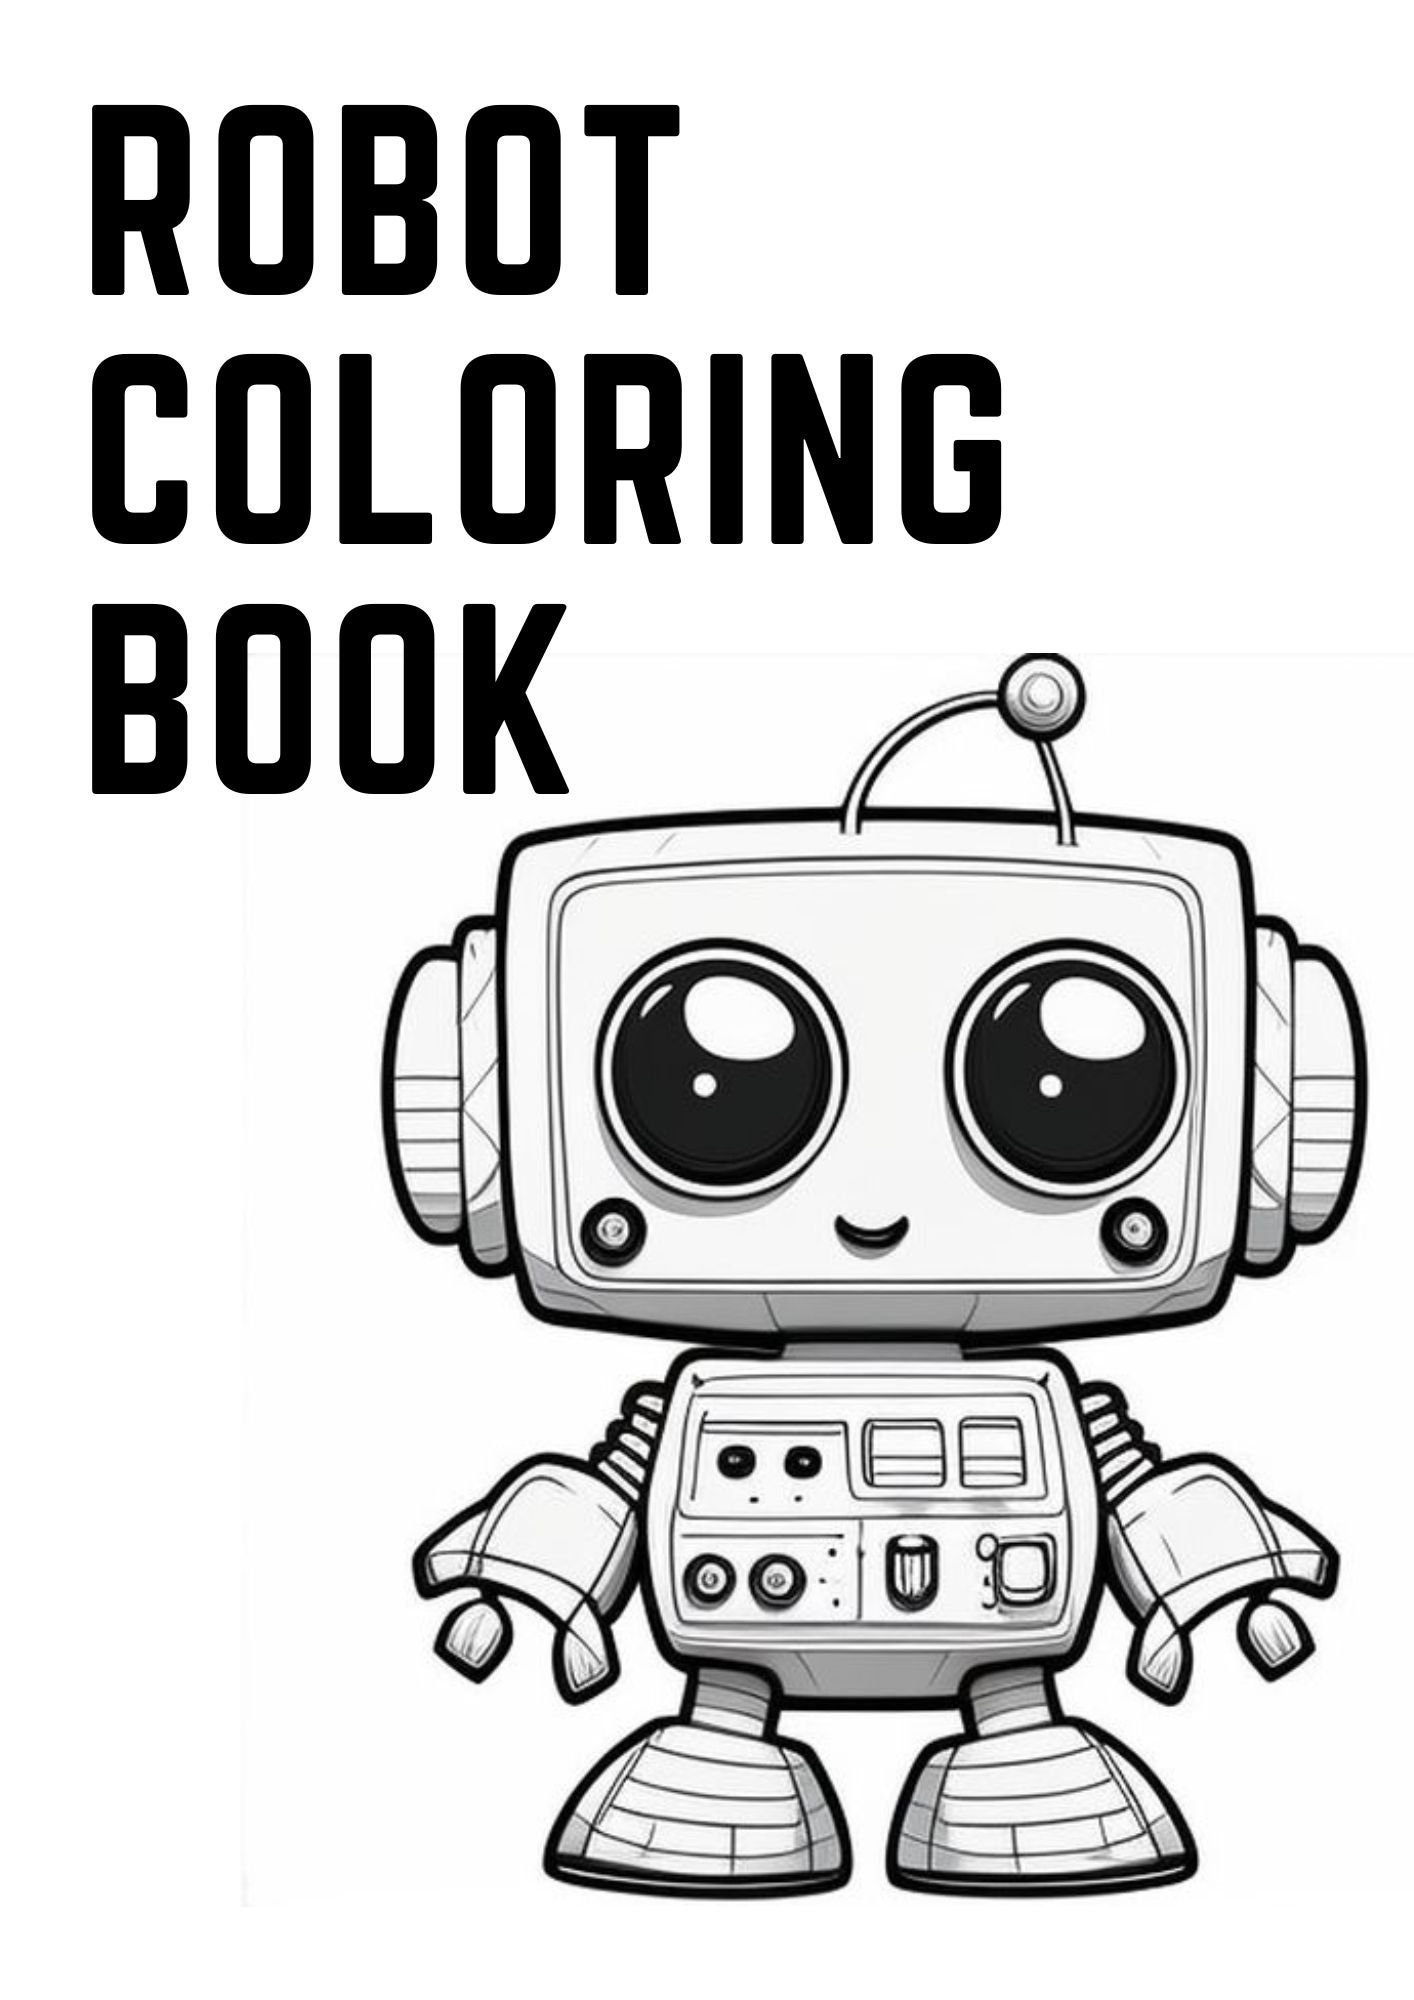 Robots Coloring Book For Kids: A Robot Coloring Book for Boys and Girls of  All Ages